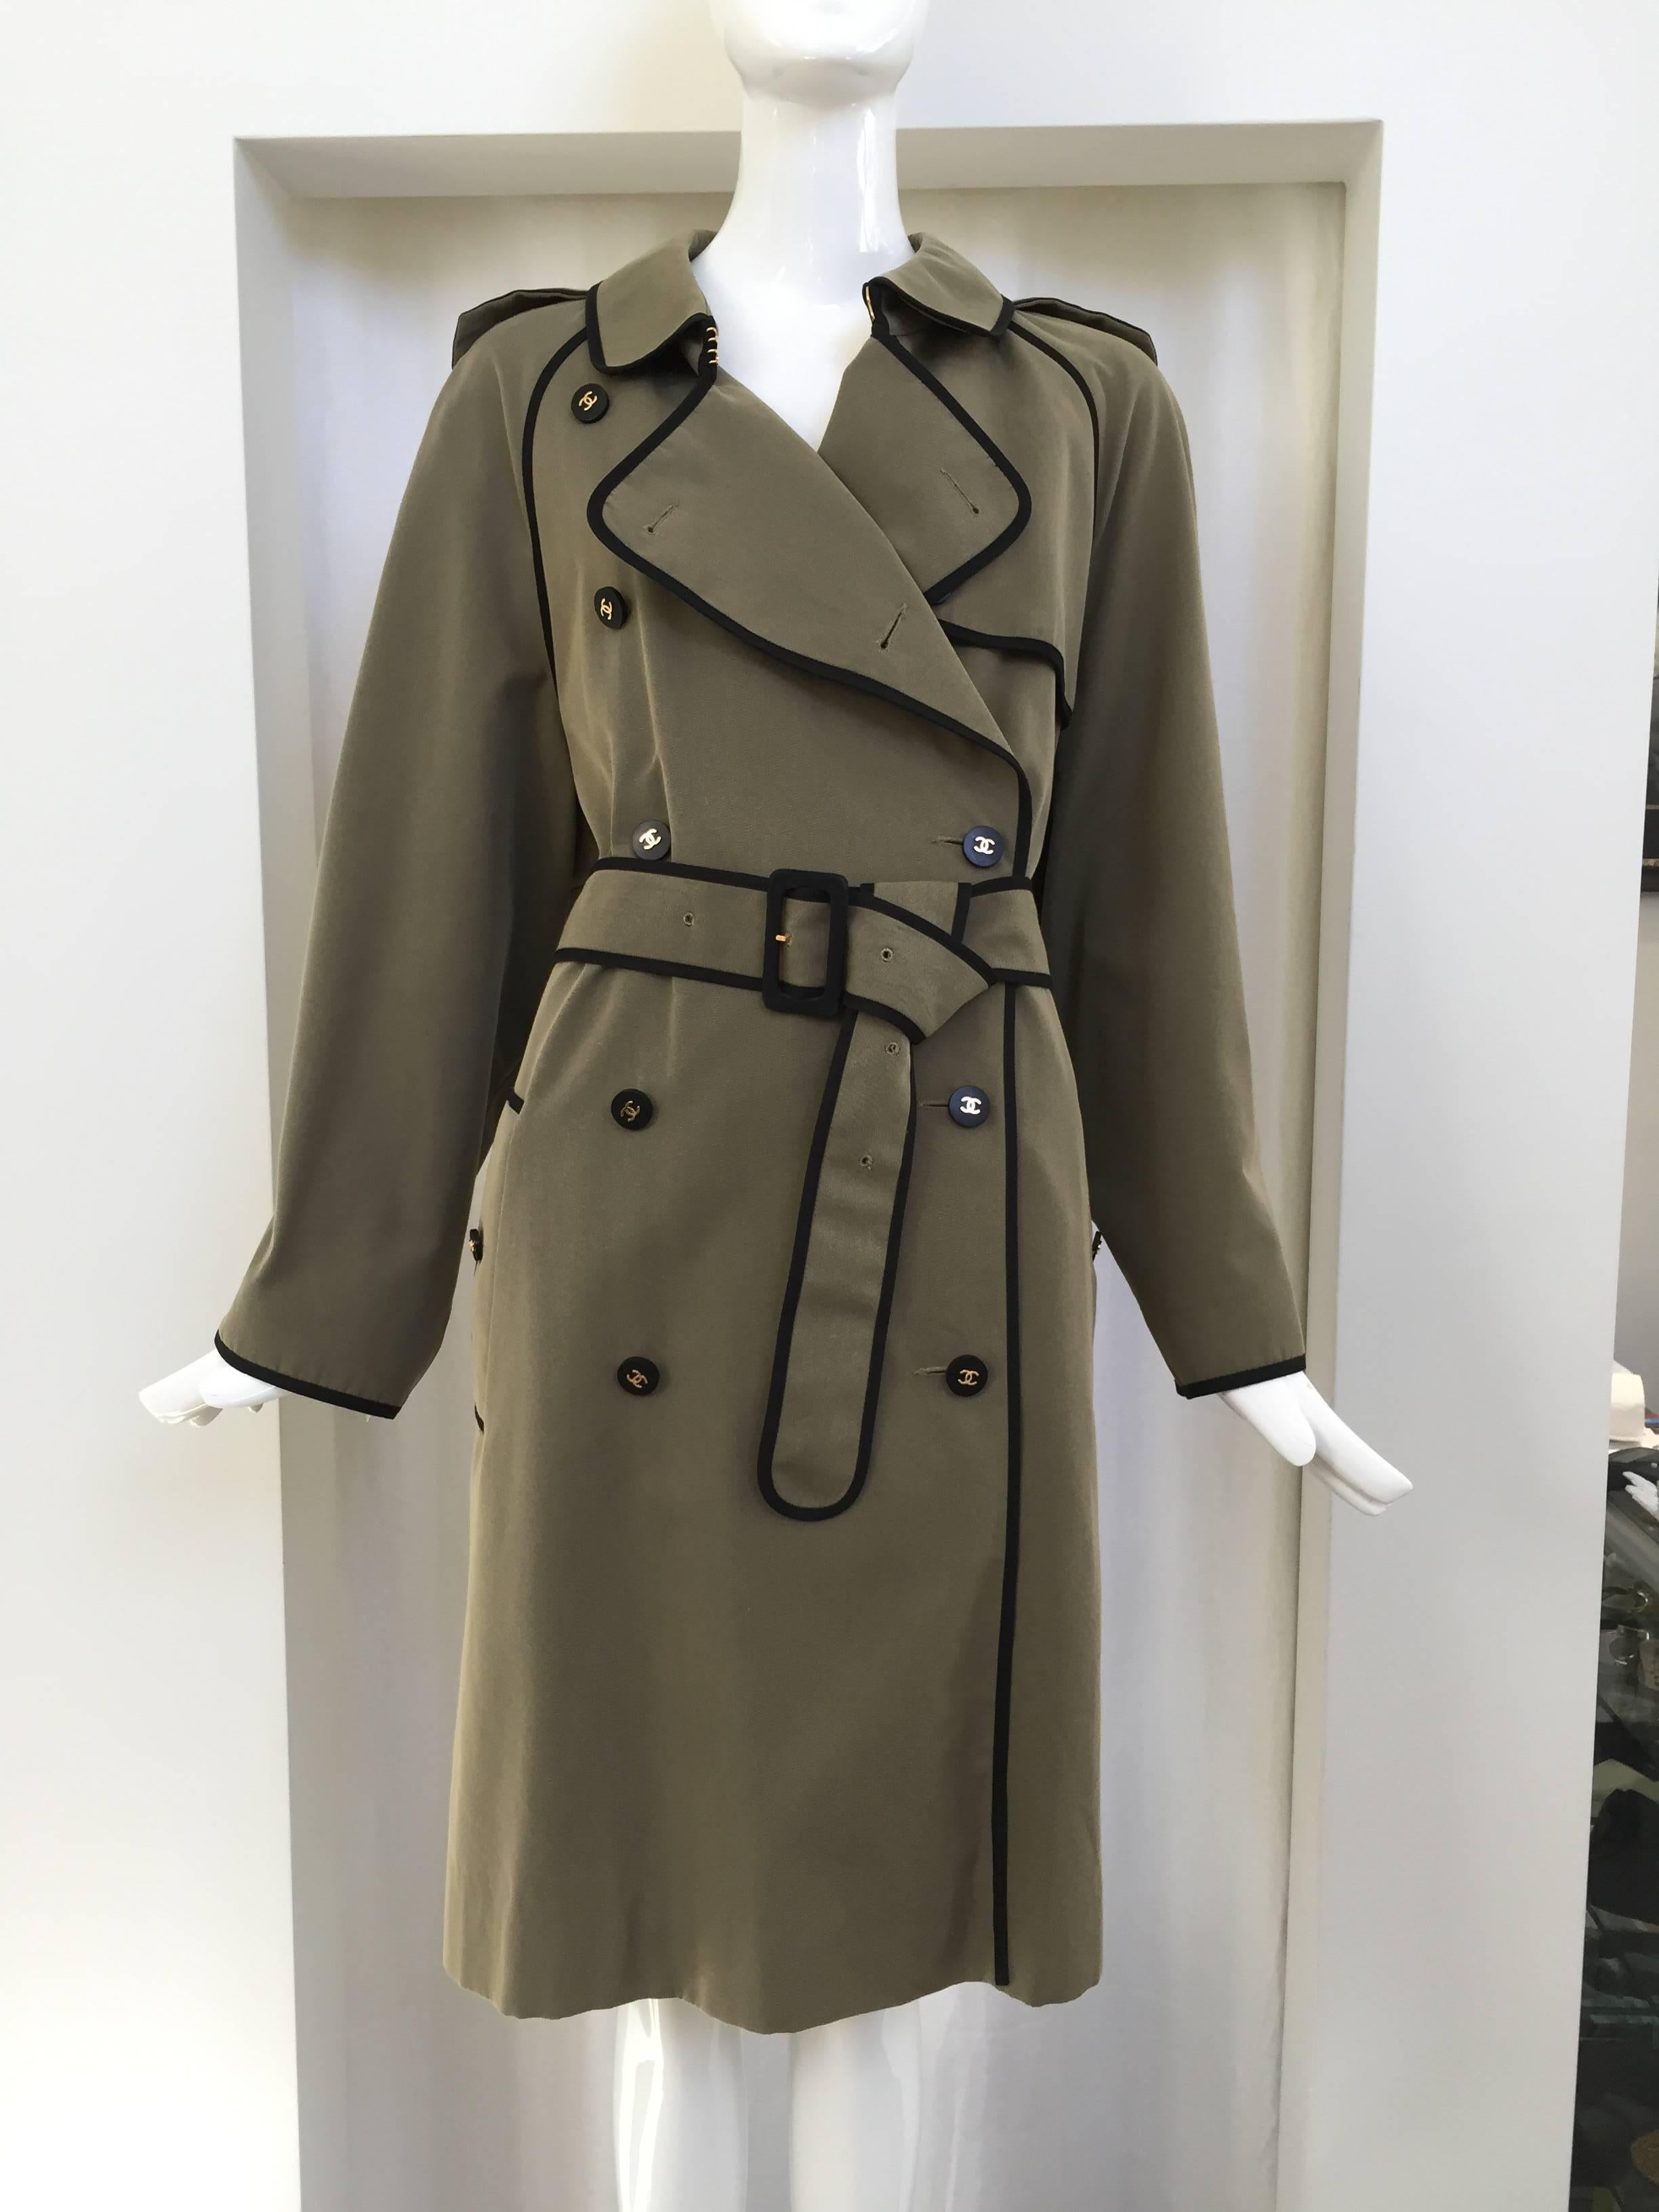 Beautiful Olive green cotton Chanel Trench coat with black piping. Chanel button. 2 pockets. Belt. Size :46  Fit best : US 8/10/12
Measurement is taken when coat is buttoned. Bust: 48"/  Waist: 48" / Hip: 54"/ Trench length from